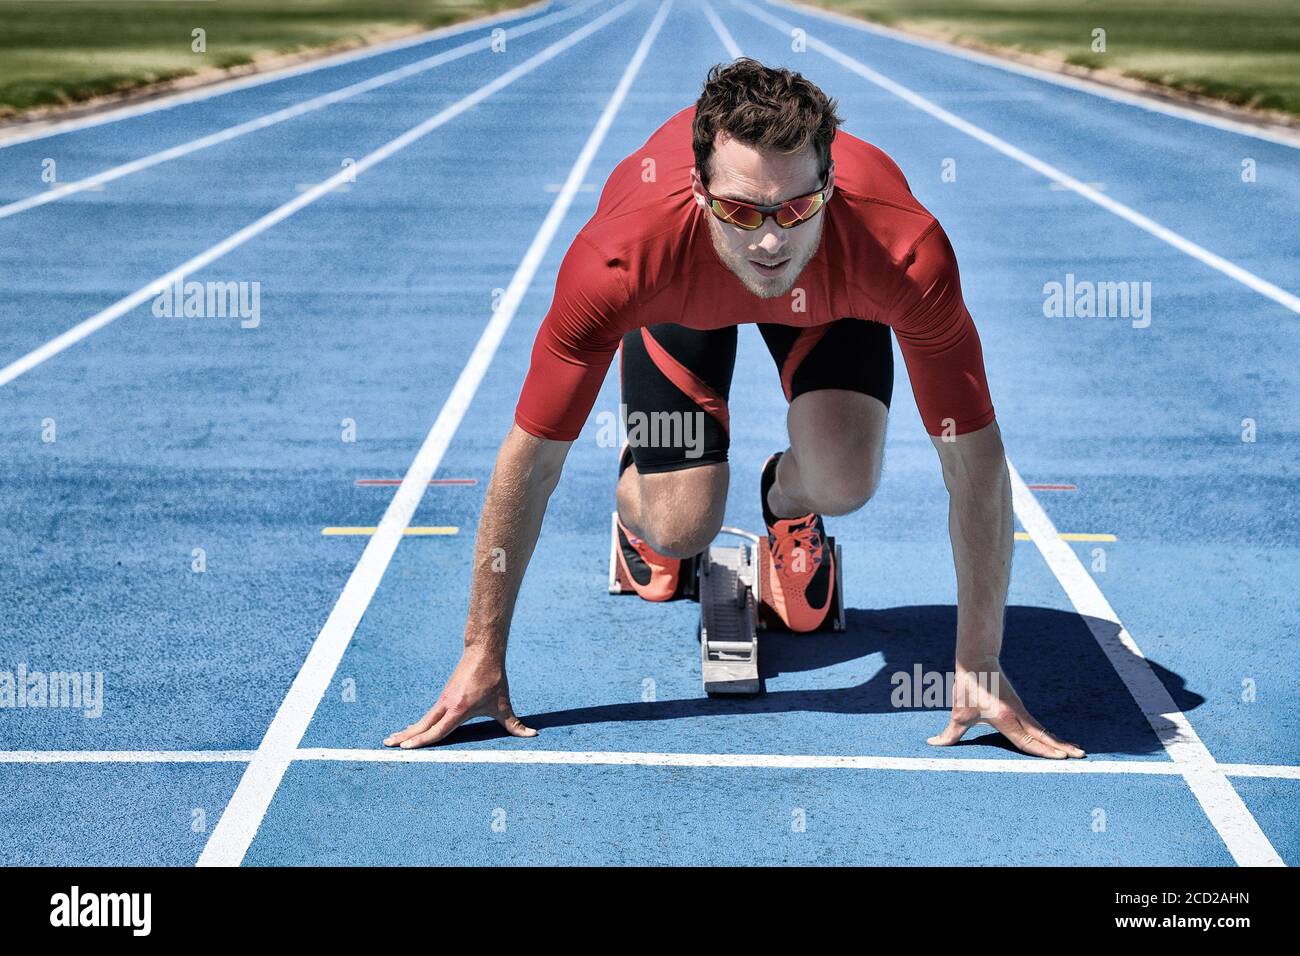 On your mark, get set, go! Running sport concept athlete ready for run competition at starting line. Sprinter man on running tracks. Stock Photo